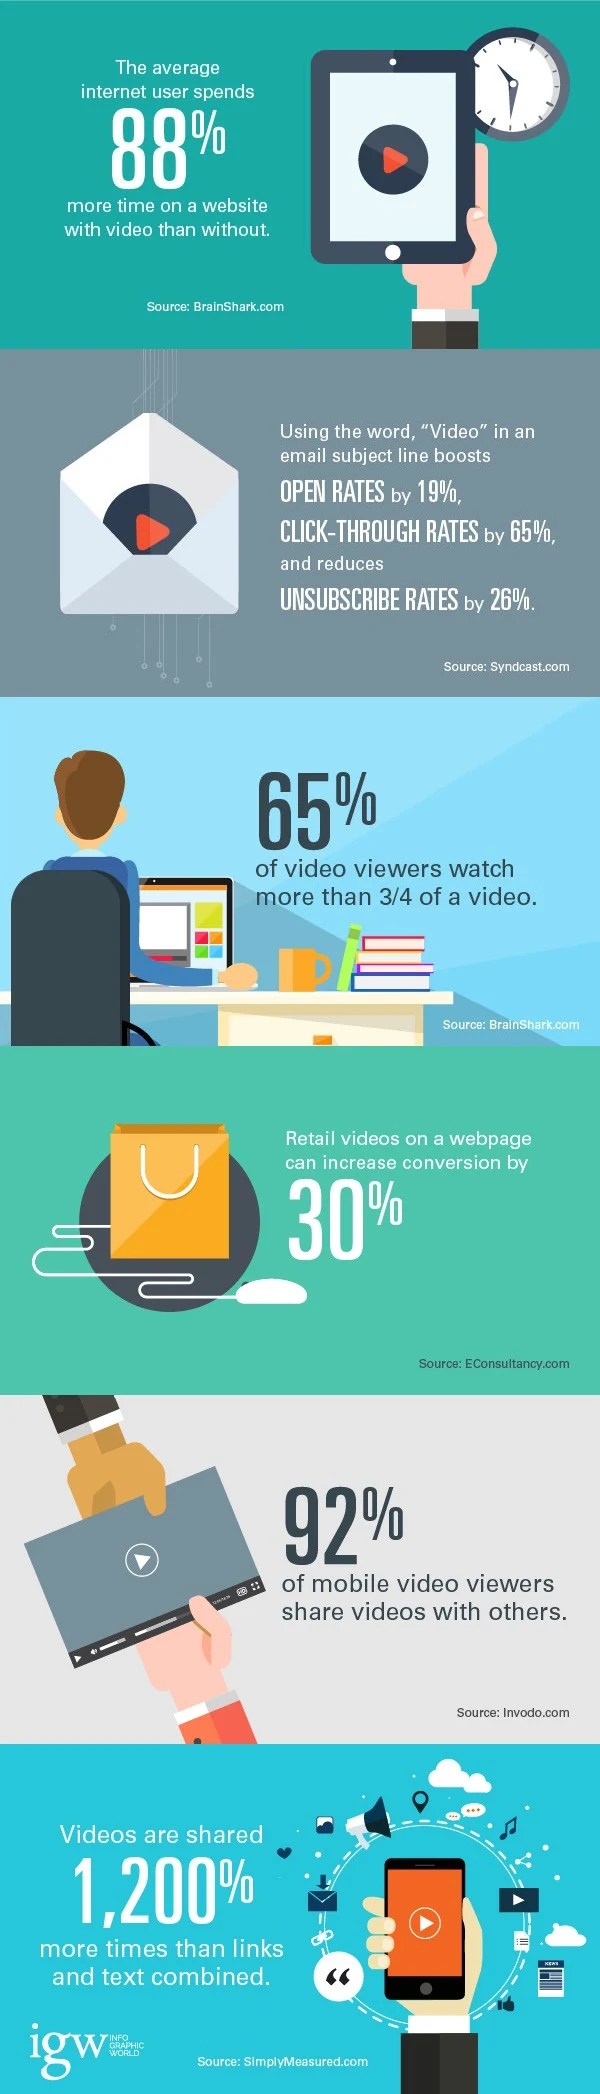 Staggering Video Marketing Statistics That Prove Video is Here To Stay - infographic